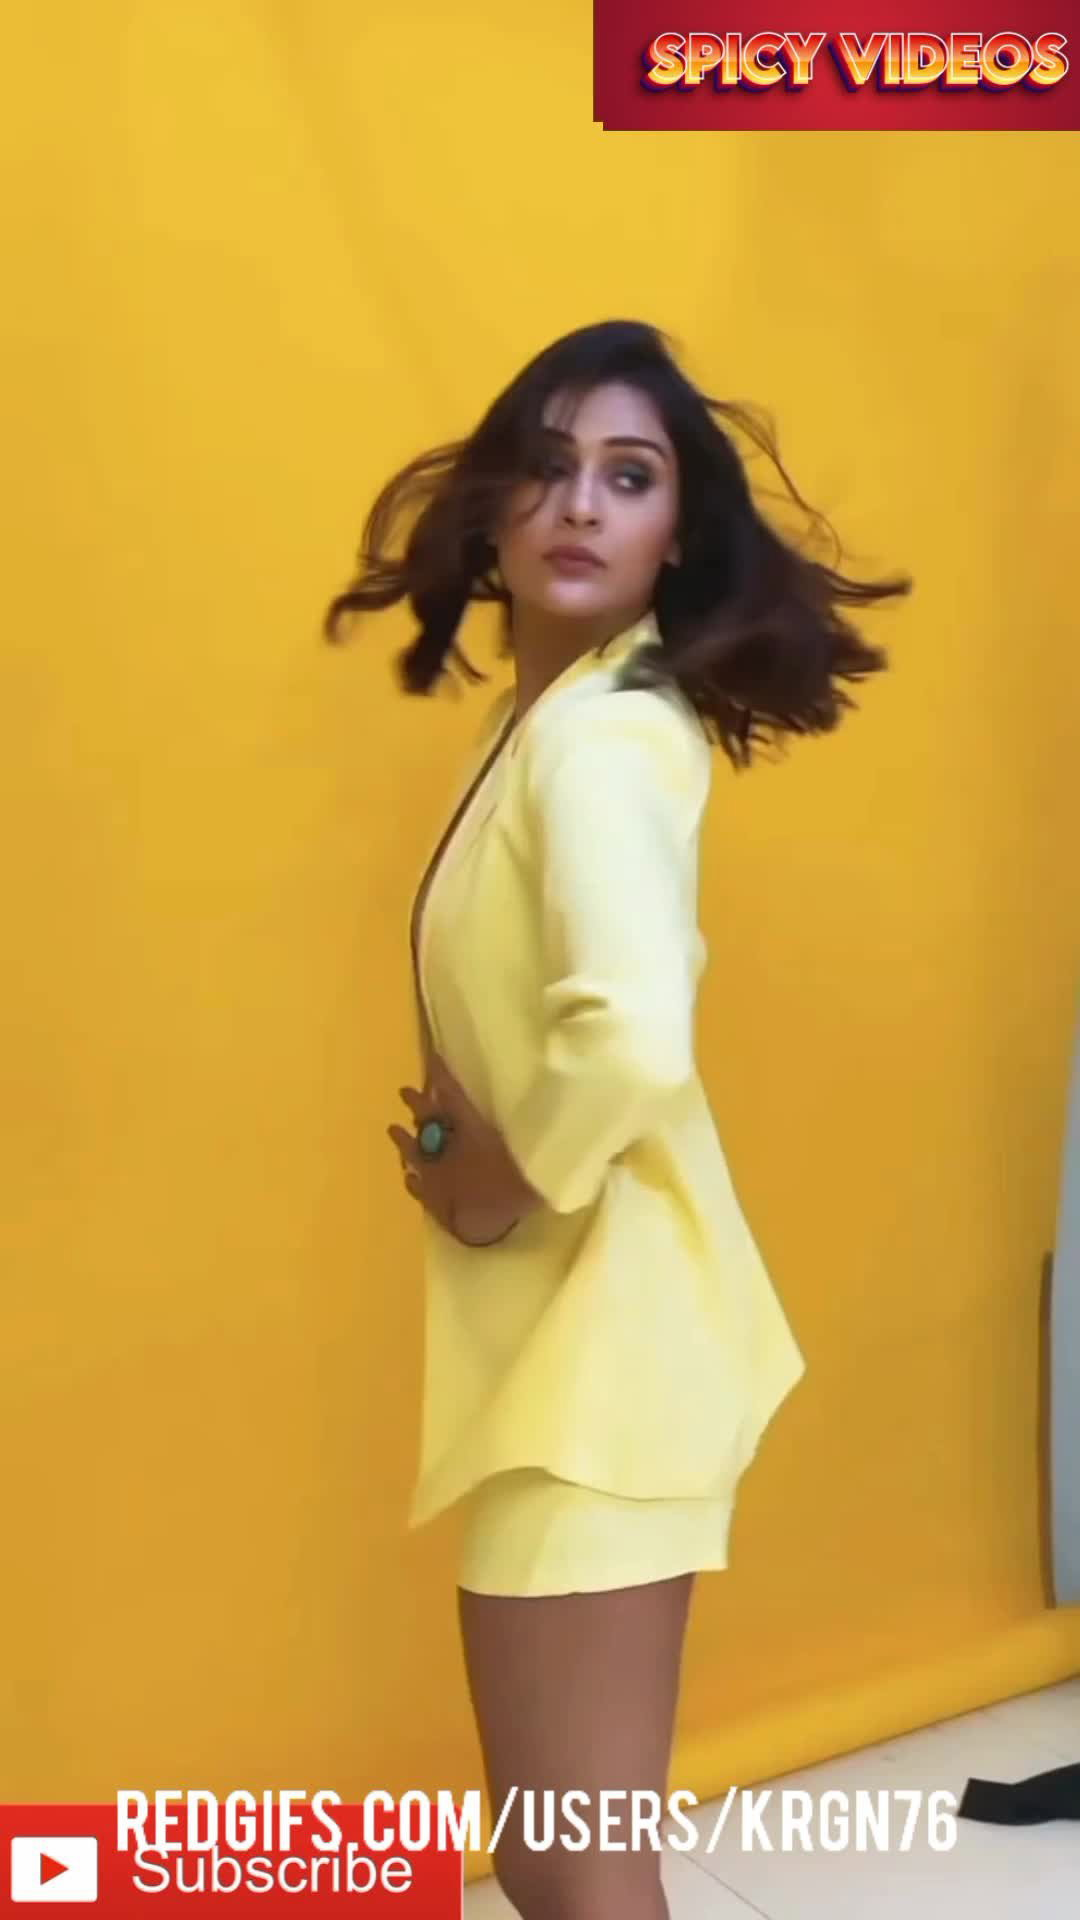 Video by Spicy Videos with the username @Spicyvideoz,  August 21, 2022 at 8:51 PM. The post is about the topic Awesome Indian and the text says 'Payal Rajput'